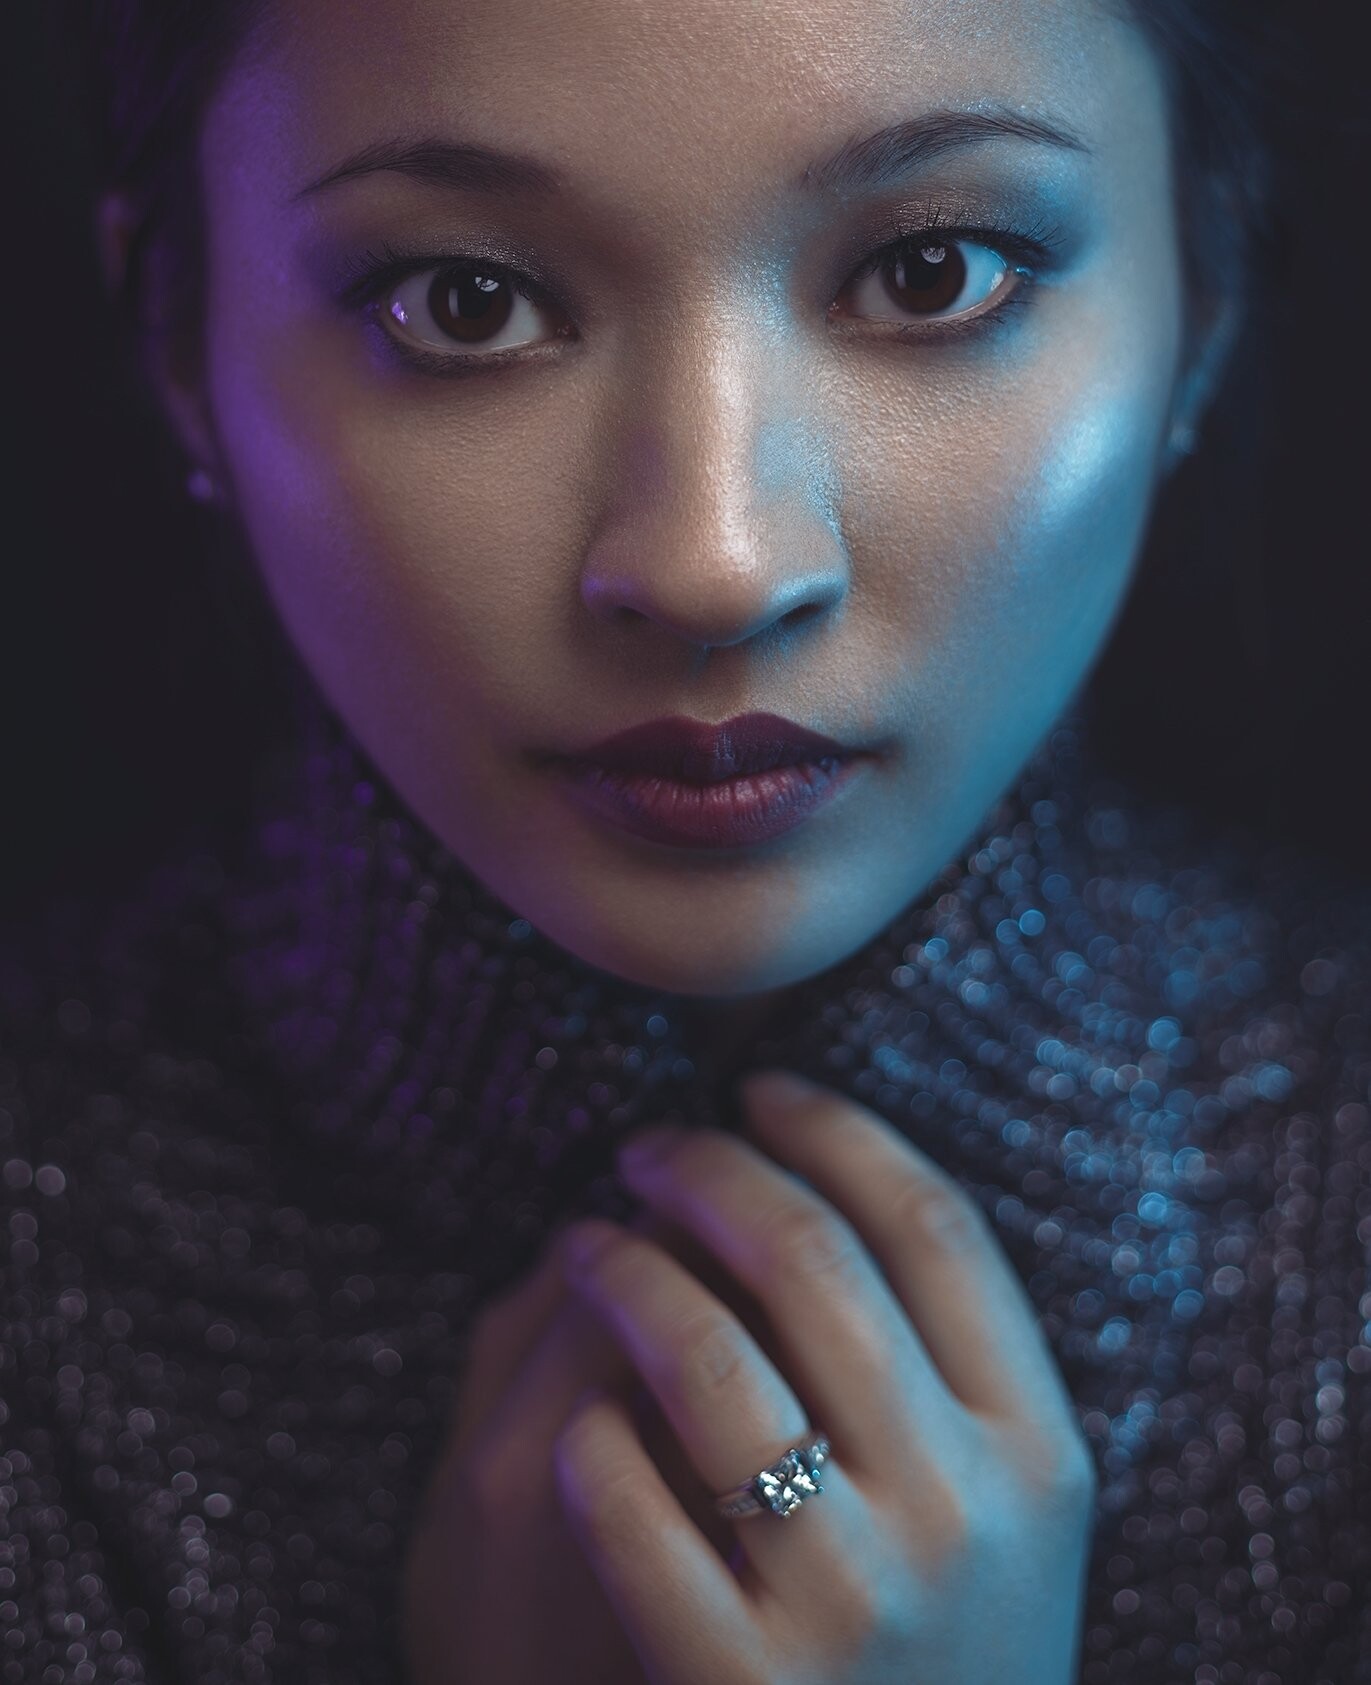 This photo is titled "Engagement"...and is one of my most intimate works - amazingly talented model. As for interest, the colors purple and blue were selected to convey certain hidden expressions. Purple represented mystery, uncertainty, but hope. Blue being the lighter side... defined having faith, to trust, and confidence in commitment. There is a double subject matter where the attention travels between her and the ring. 